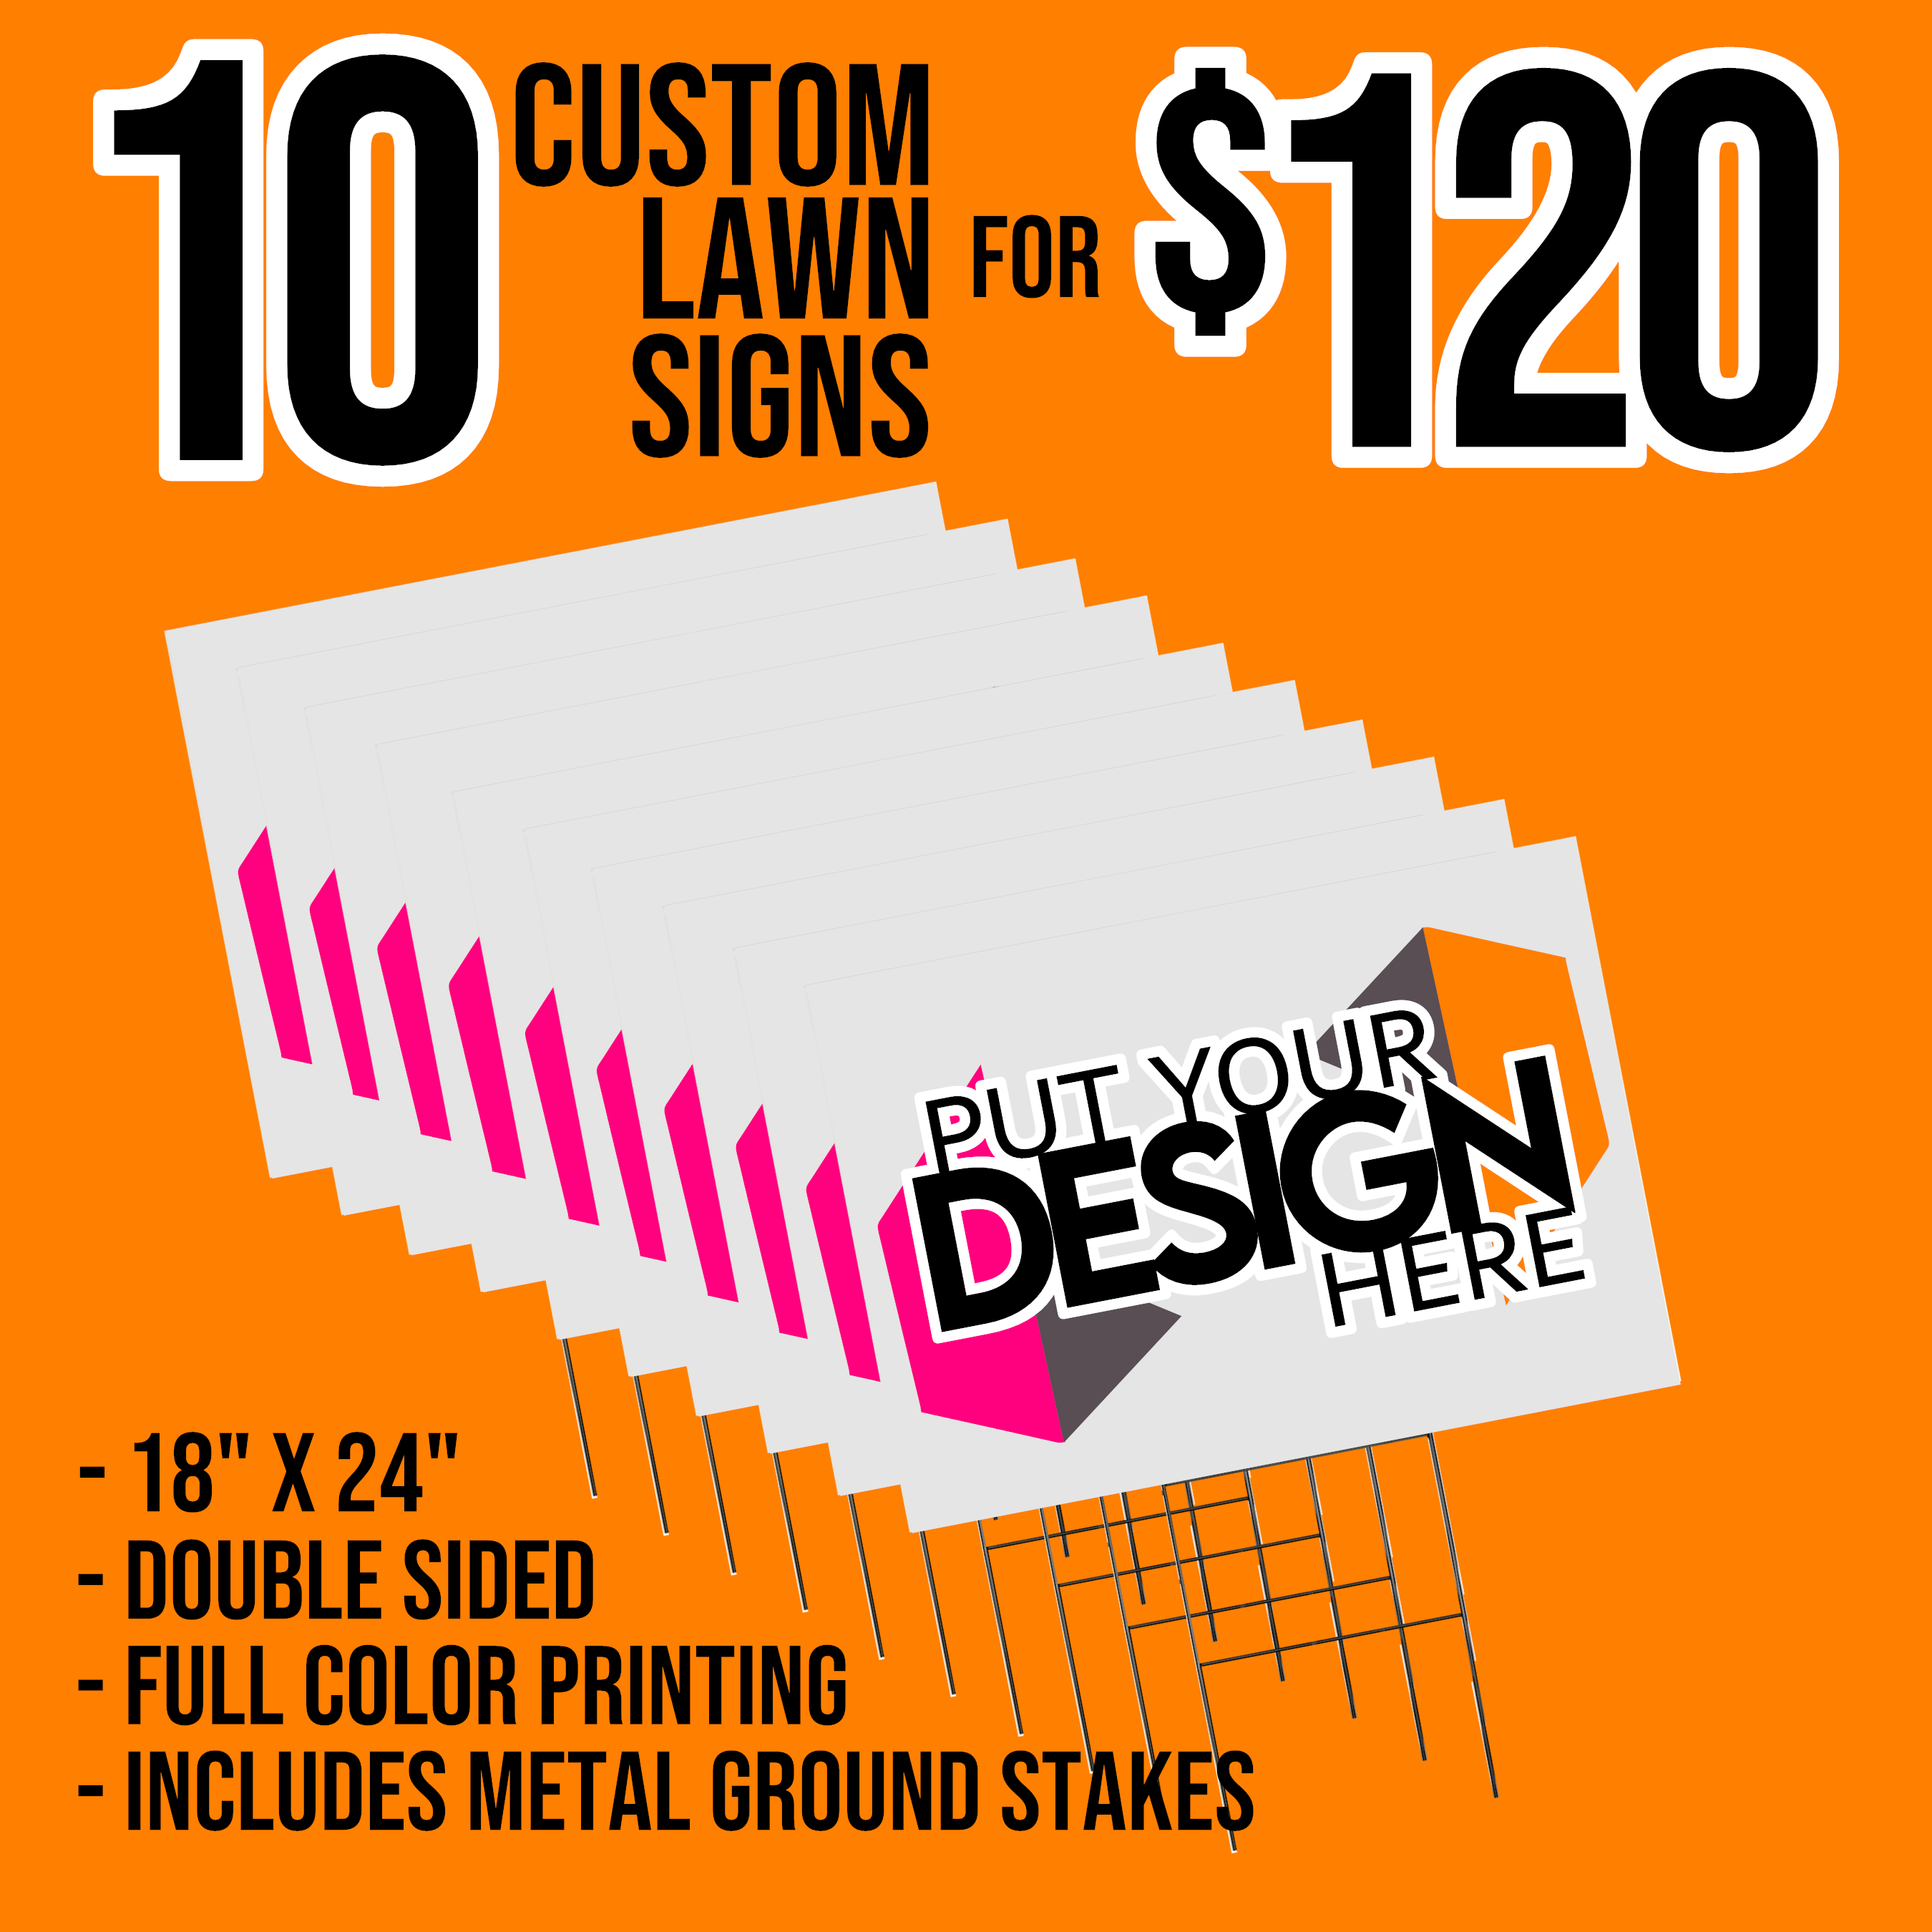 10 Custom Lawn Signs for $120 thumbnail